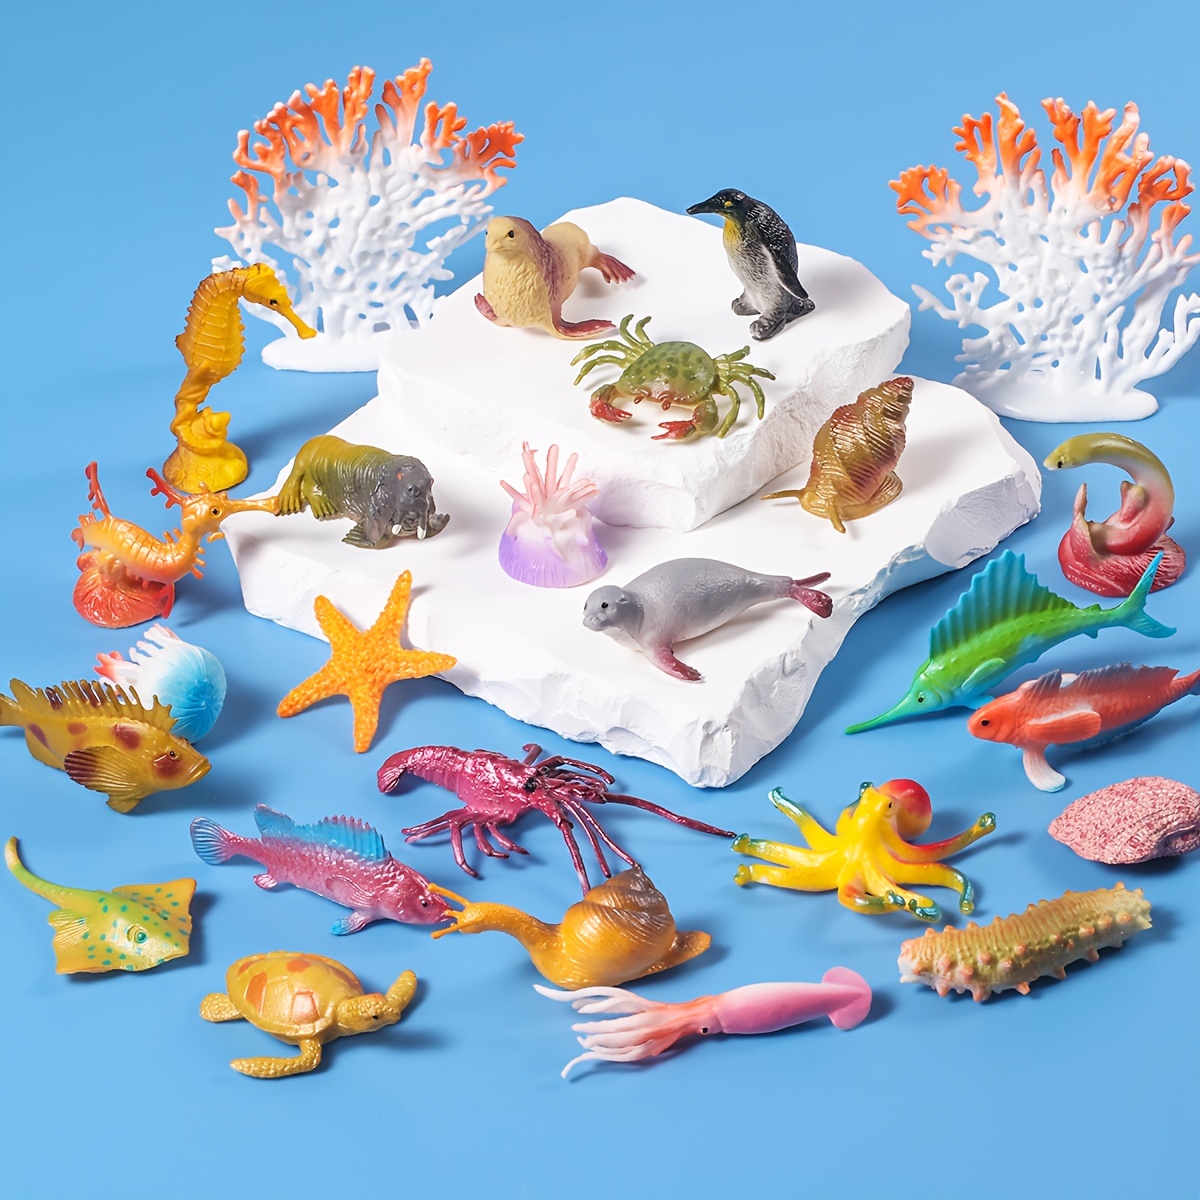 

Ocean Sea Animals Figures, 60pcs Mini Plastic Deep Underwater Life Creatures Set, Stem Educational Shower Bath Toys Gift For Cupcake Toppers Party Supplies With Turtle Octopus